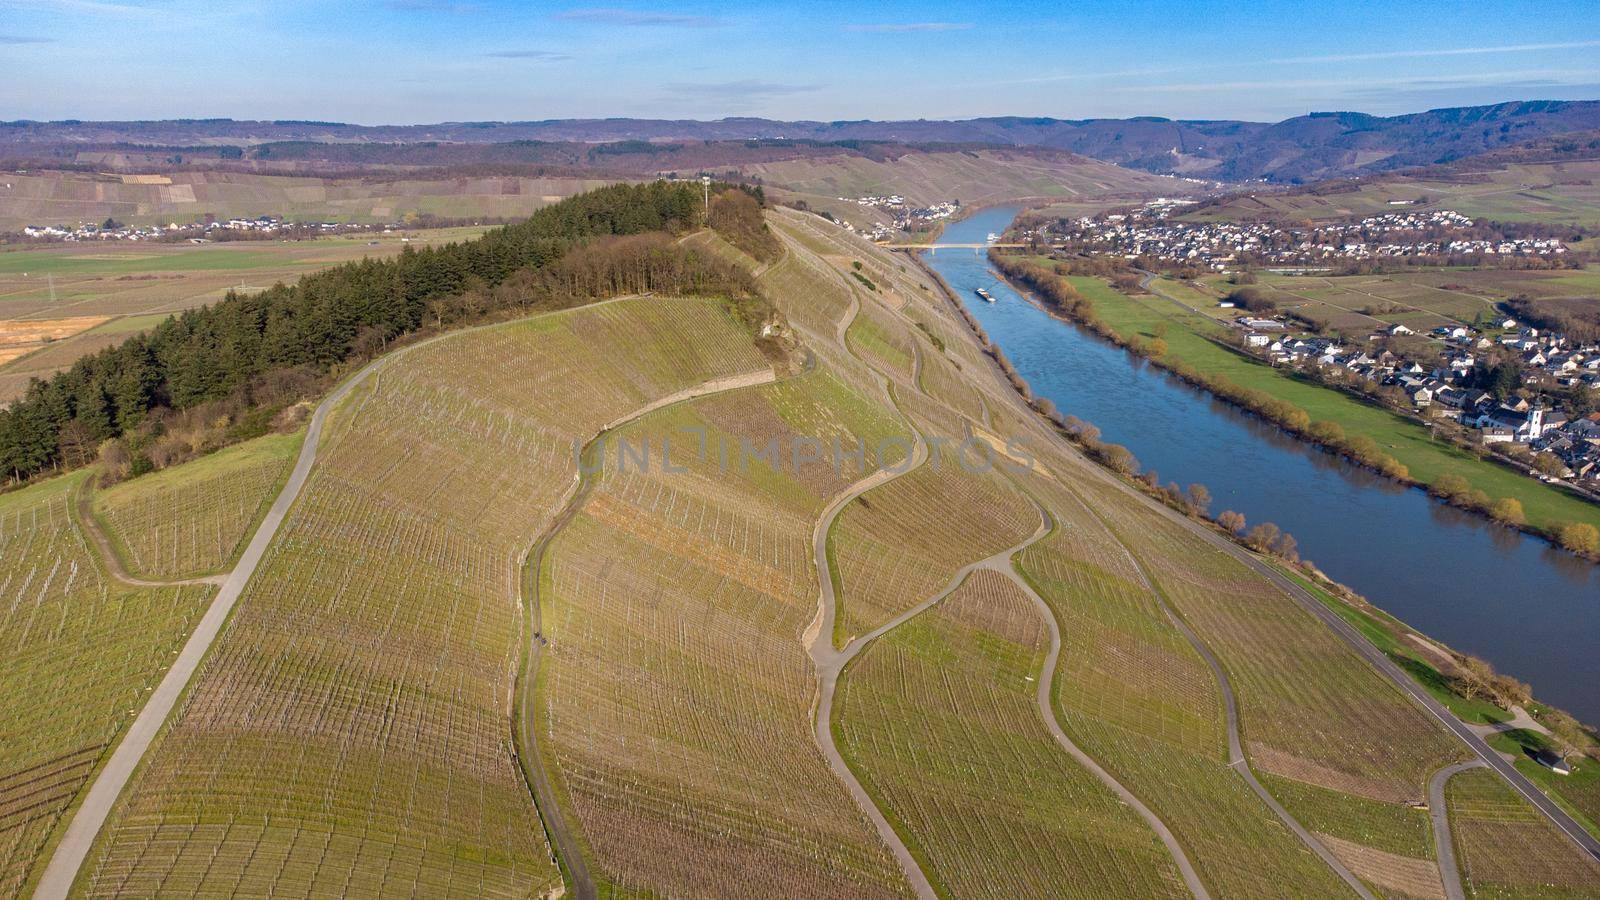 Aerial view of the river Moselle valley with vineyards and the villages Brauneberg and Muelheim 